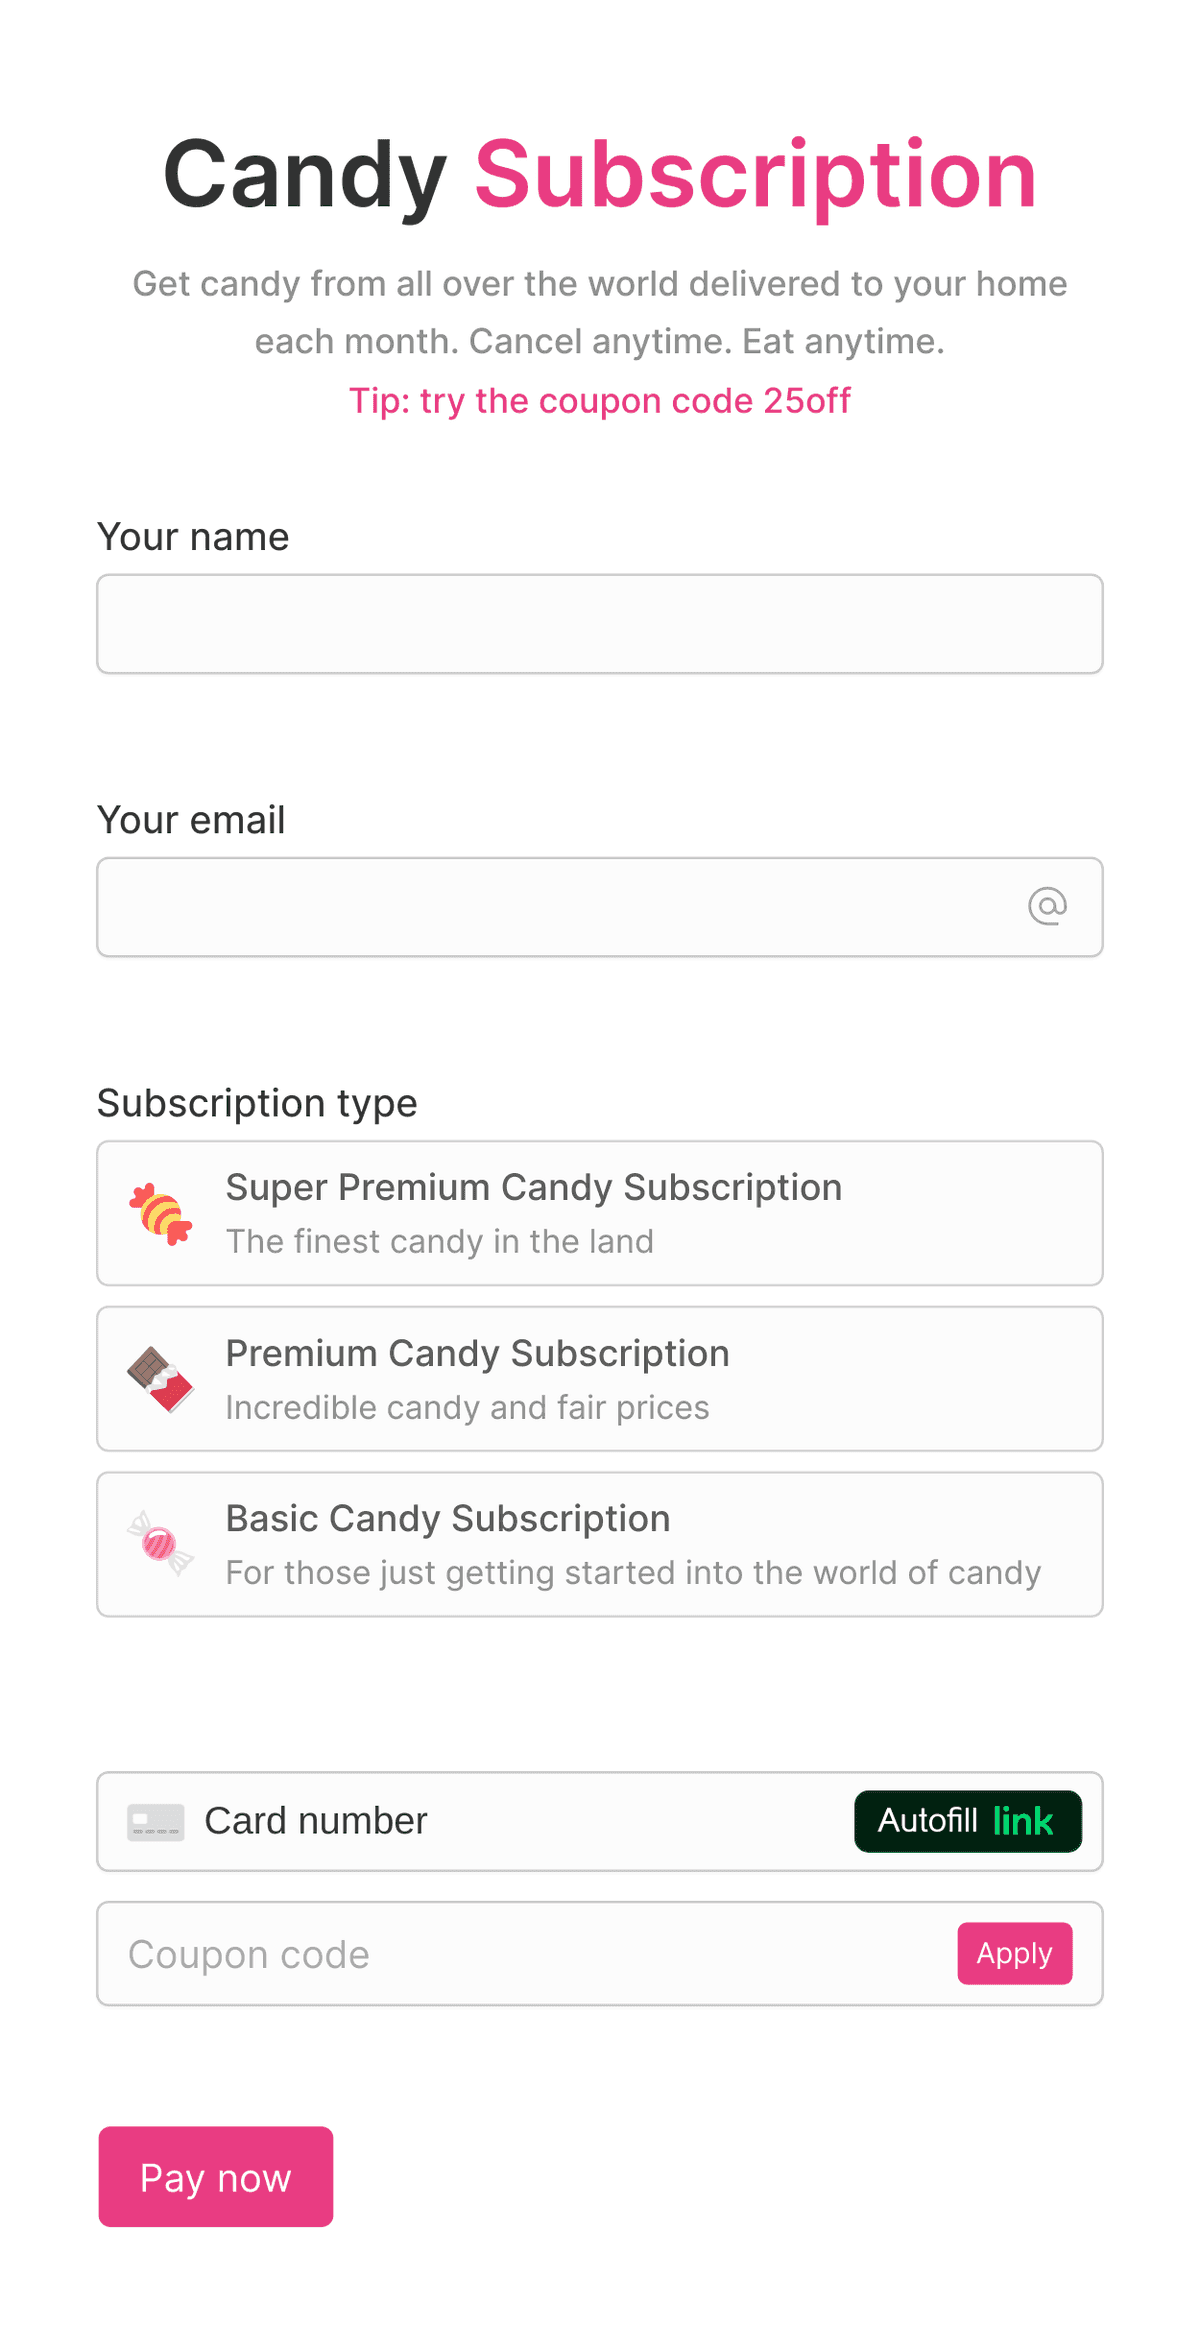 'Subscription form' form with various input fields and a submit button